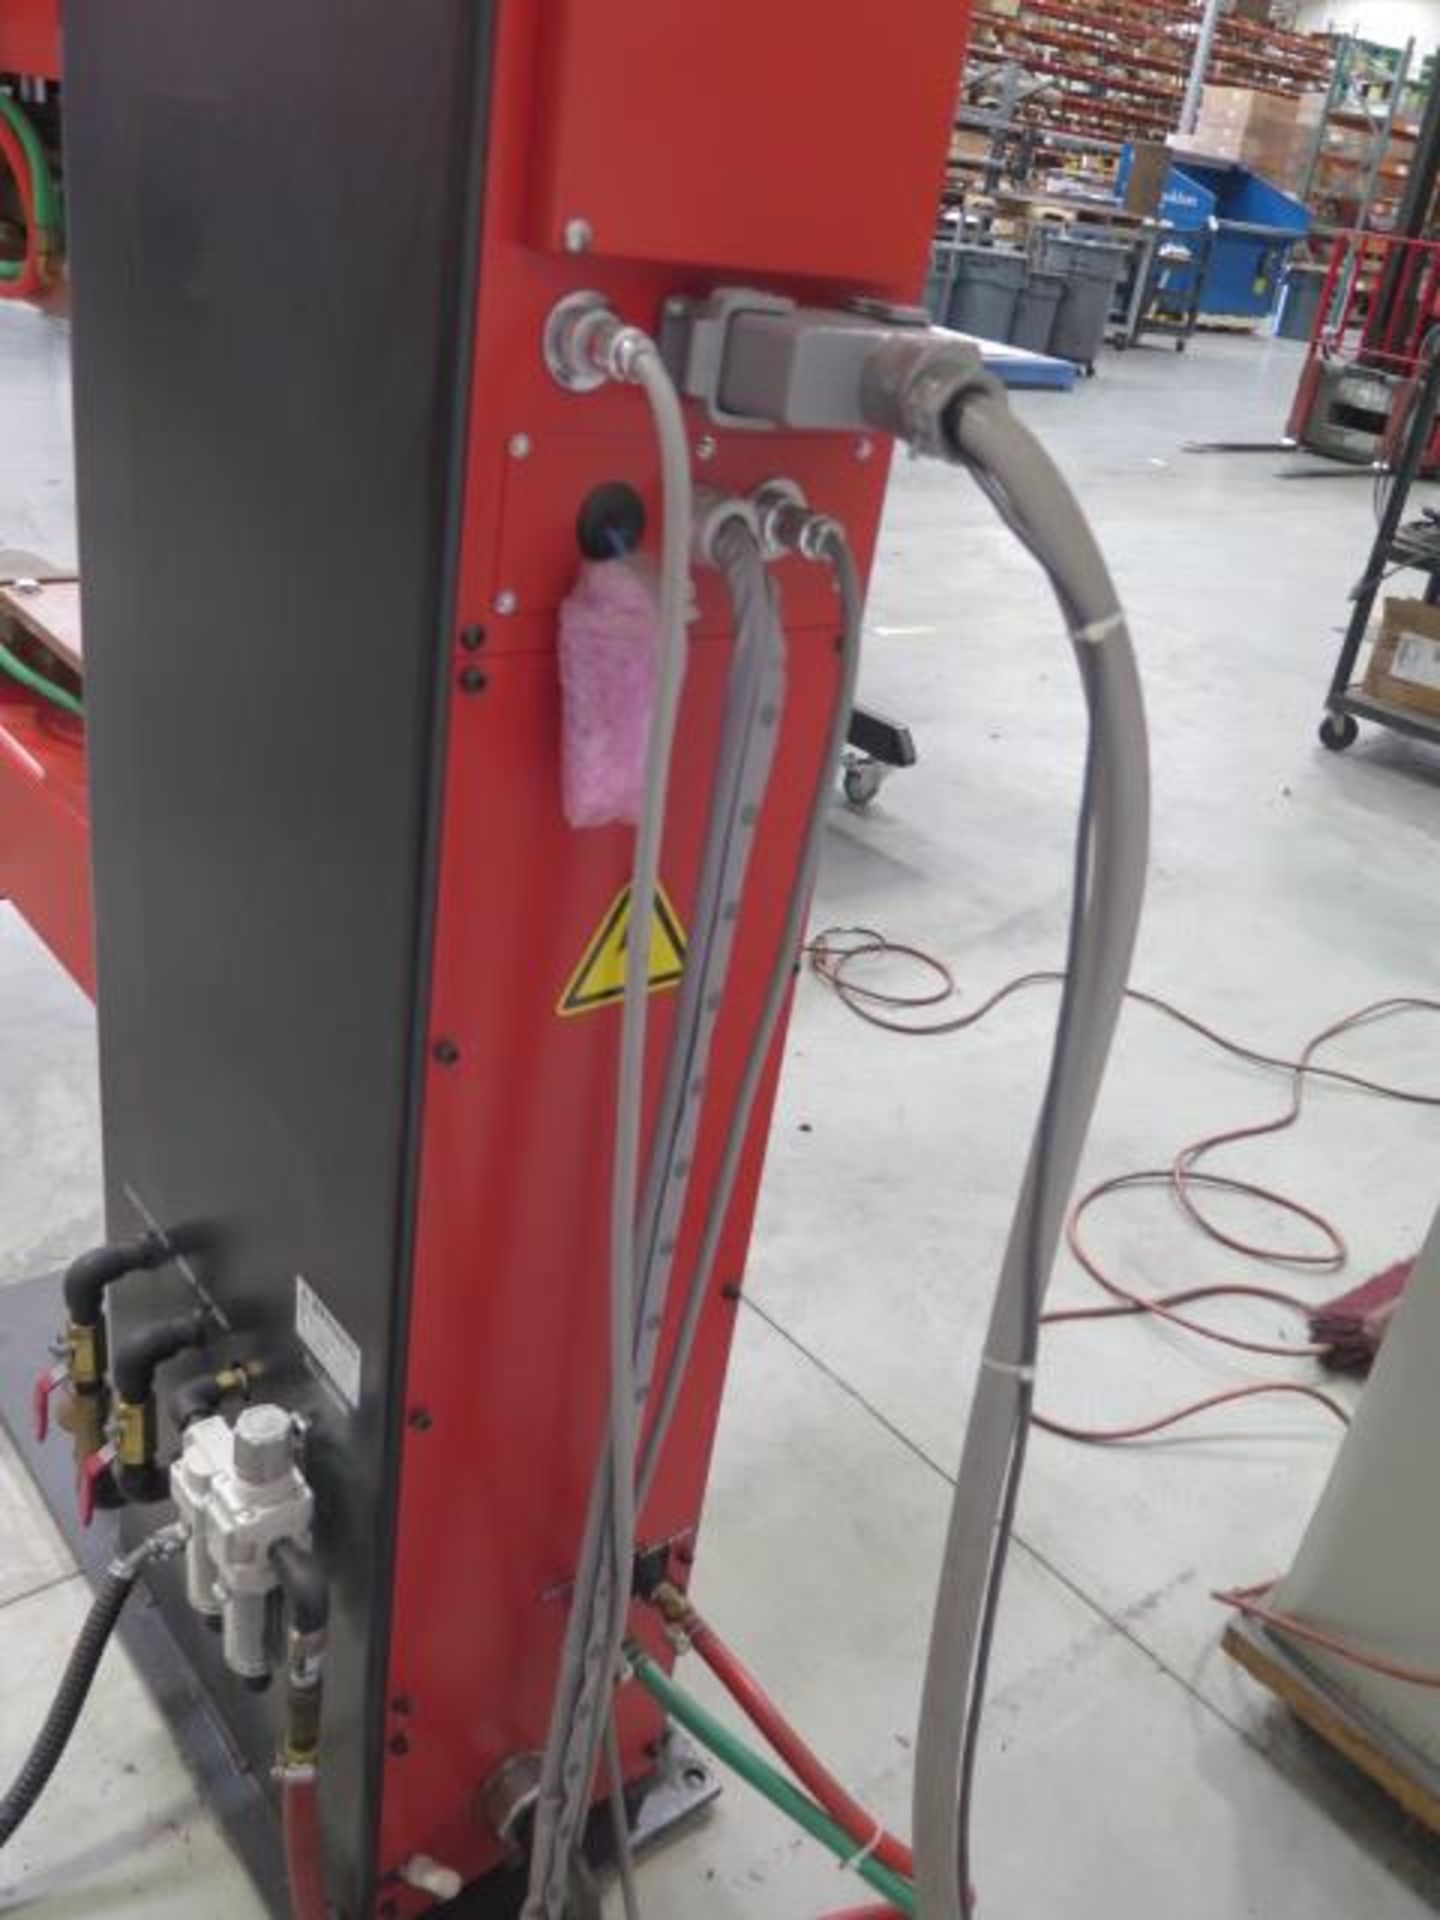 2017 Amada ID40 IV HP-NT 257kVA Spot Welder s/n 80460065 w/ Amada Touch Screen Controls, SOLD AS IS - Image 15 of 16